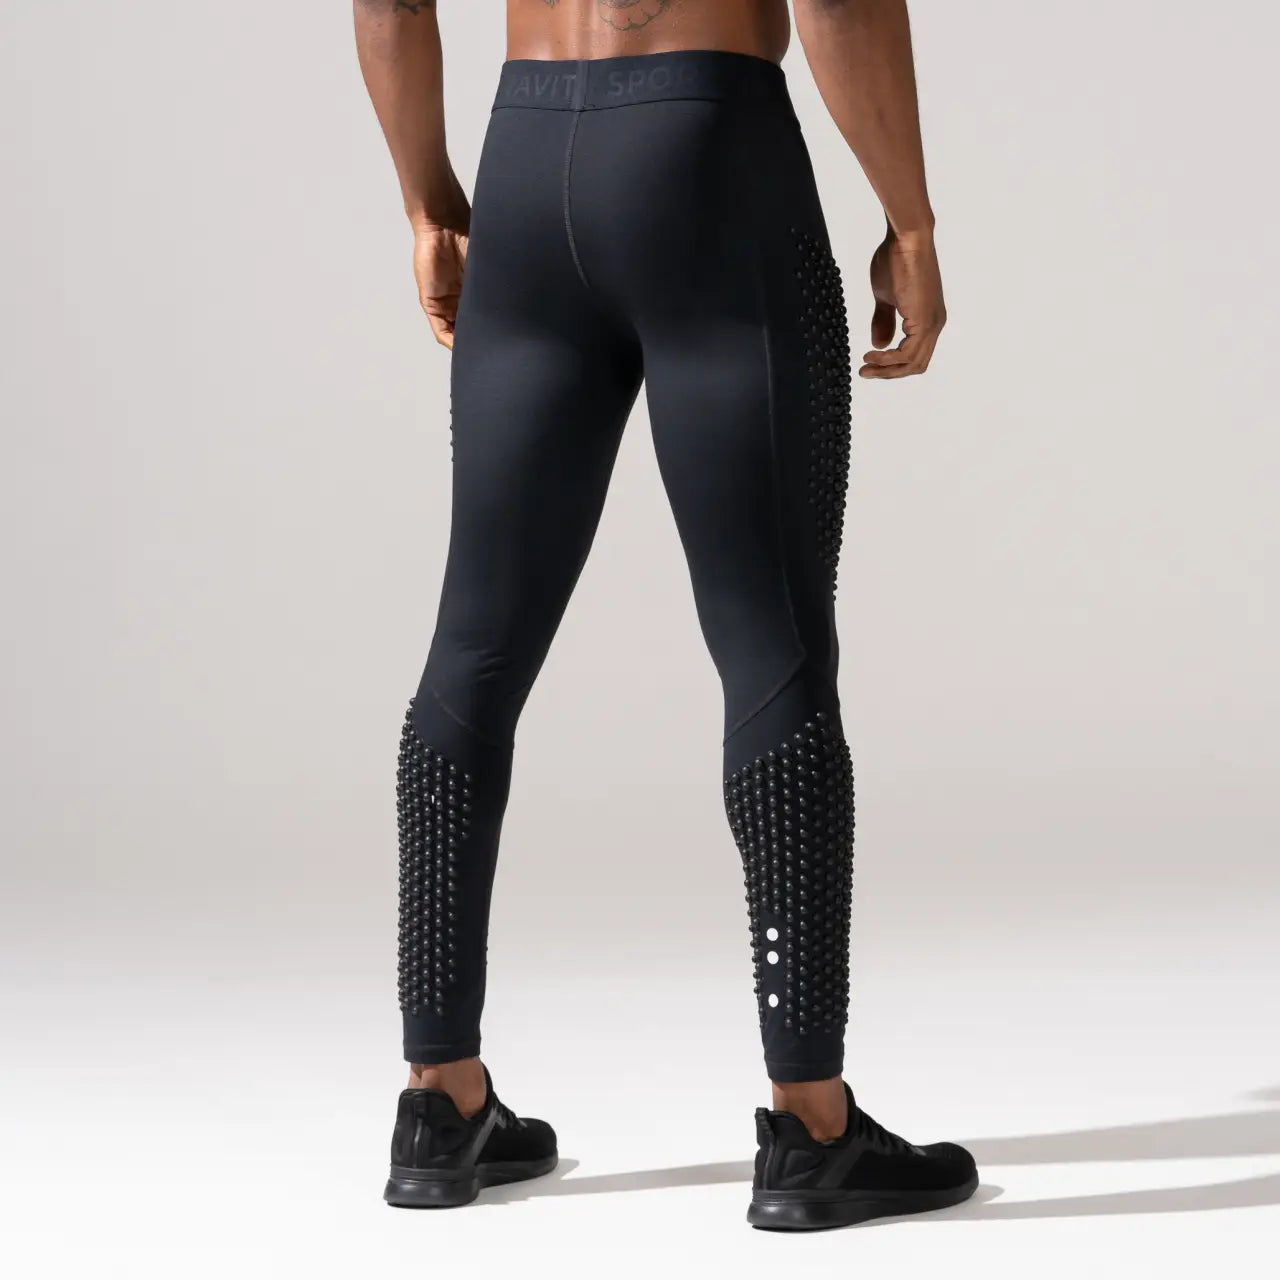 Men's Compression Leggings with Kinesiology Tape Technology – WaveWear